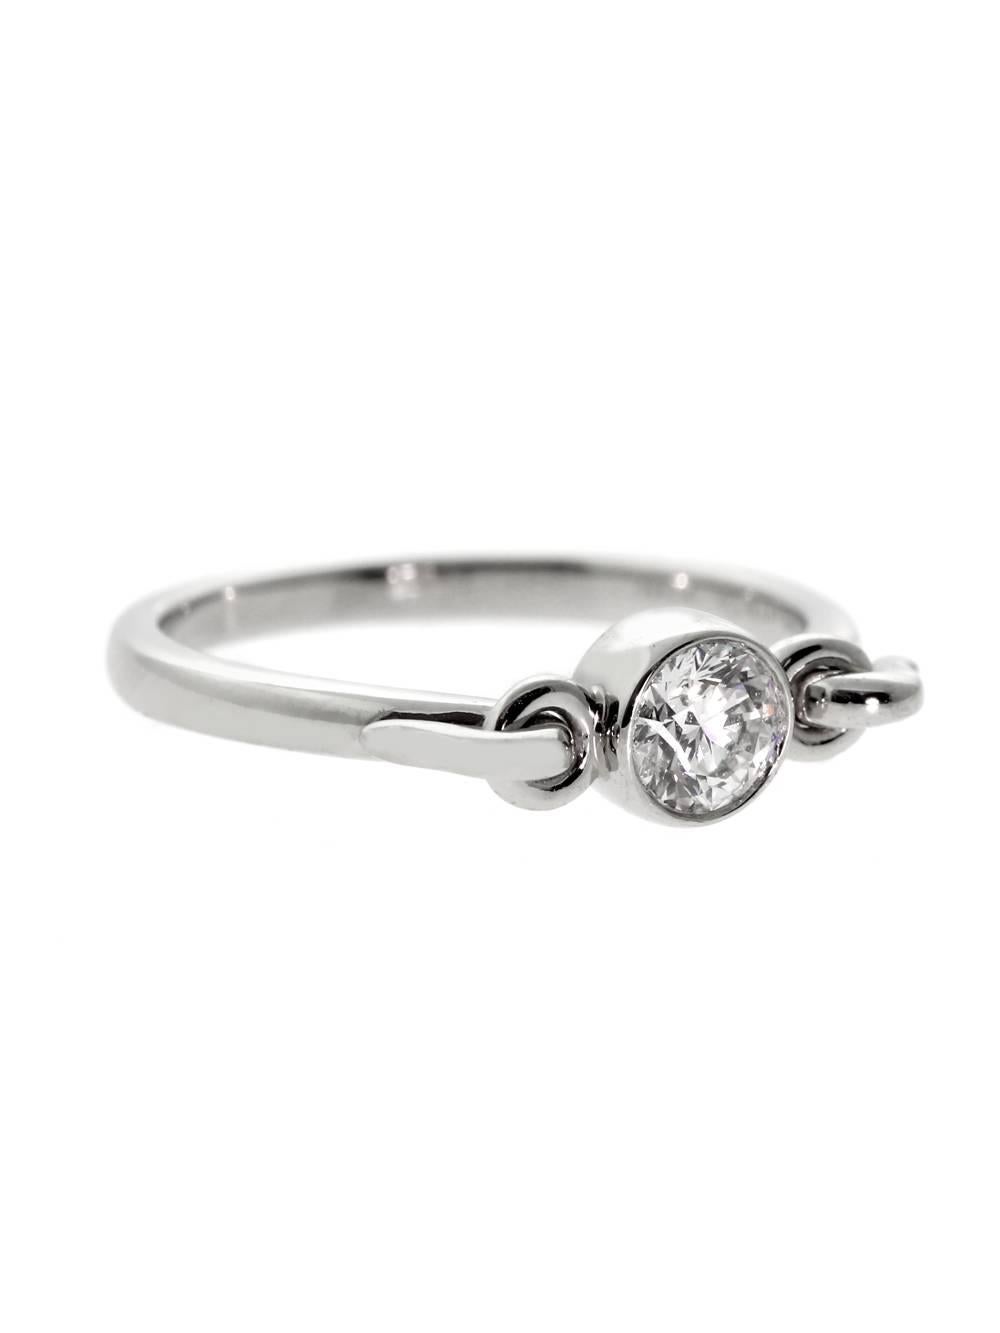 A classic diamond solitaire ring by Tiffany & Co, featuring a .44ct round brilliant cut diamond set in platinum. 

Size 4 (Resizeable)

Inventory ID: 0000372